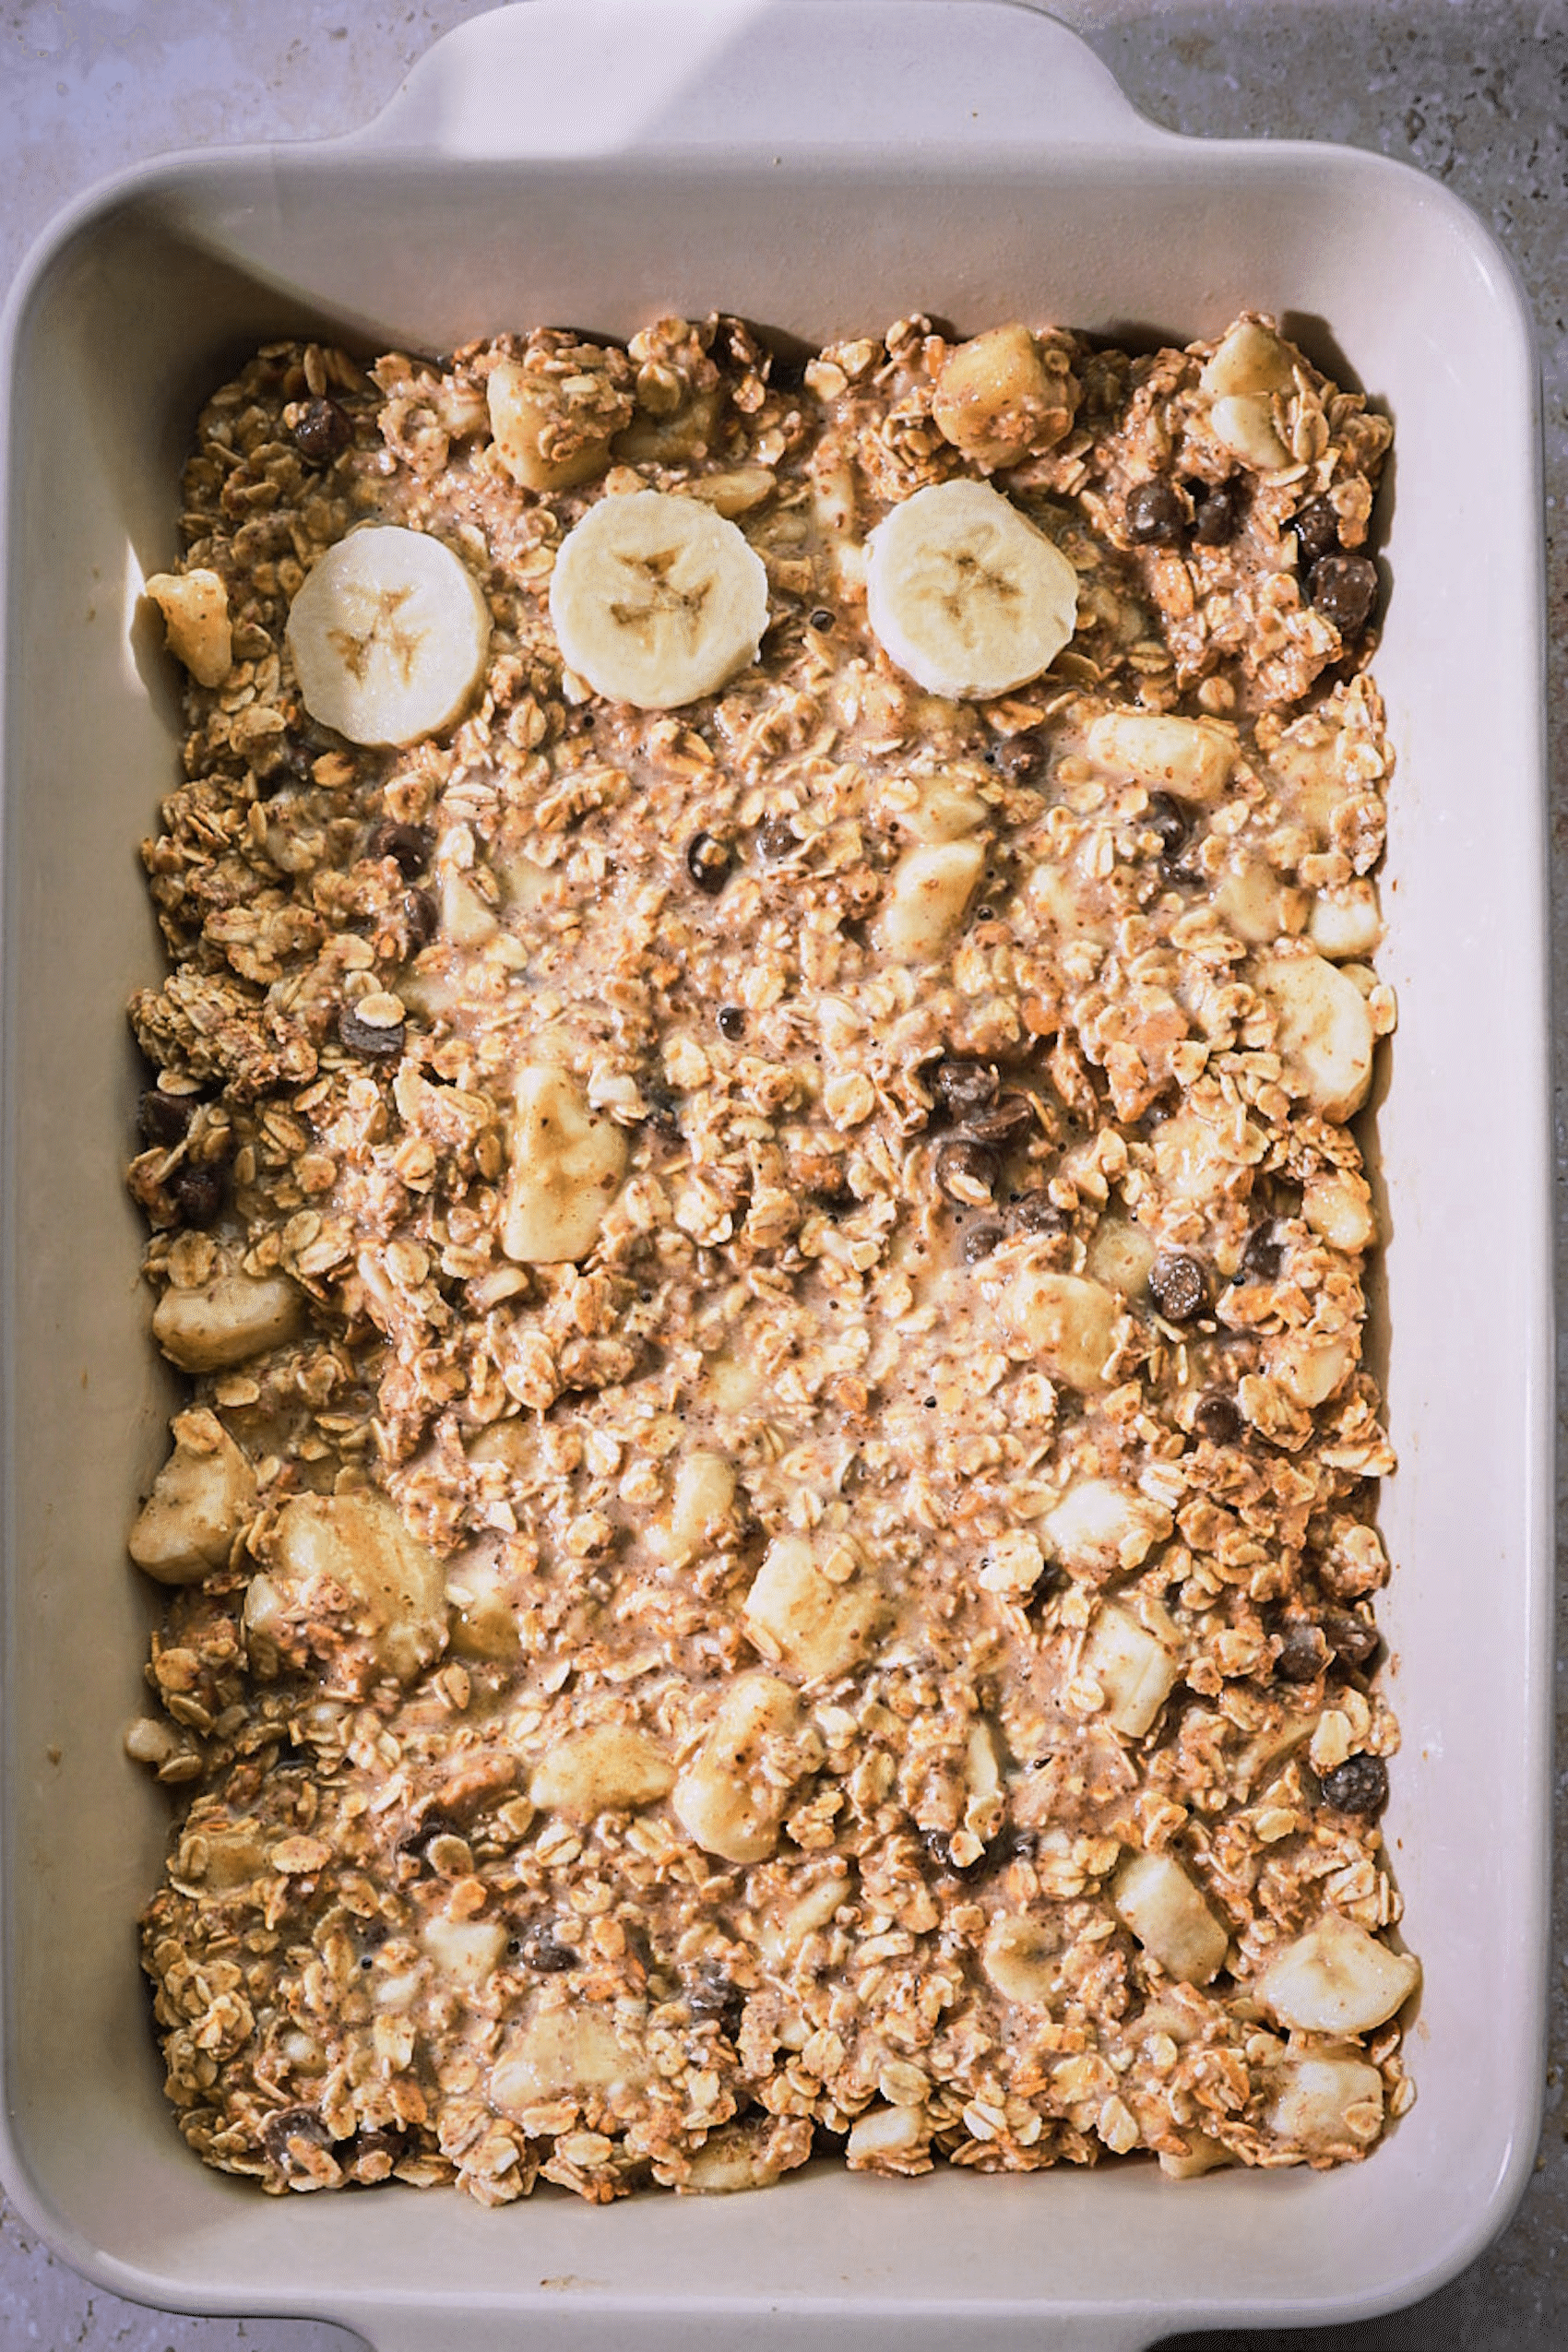 a tray of baked oatmeal being topped with sliced bananas